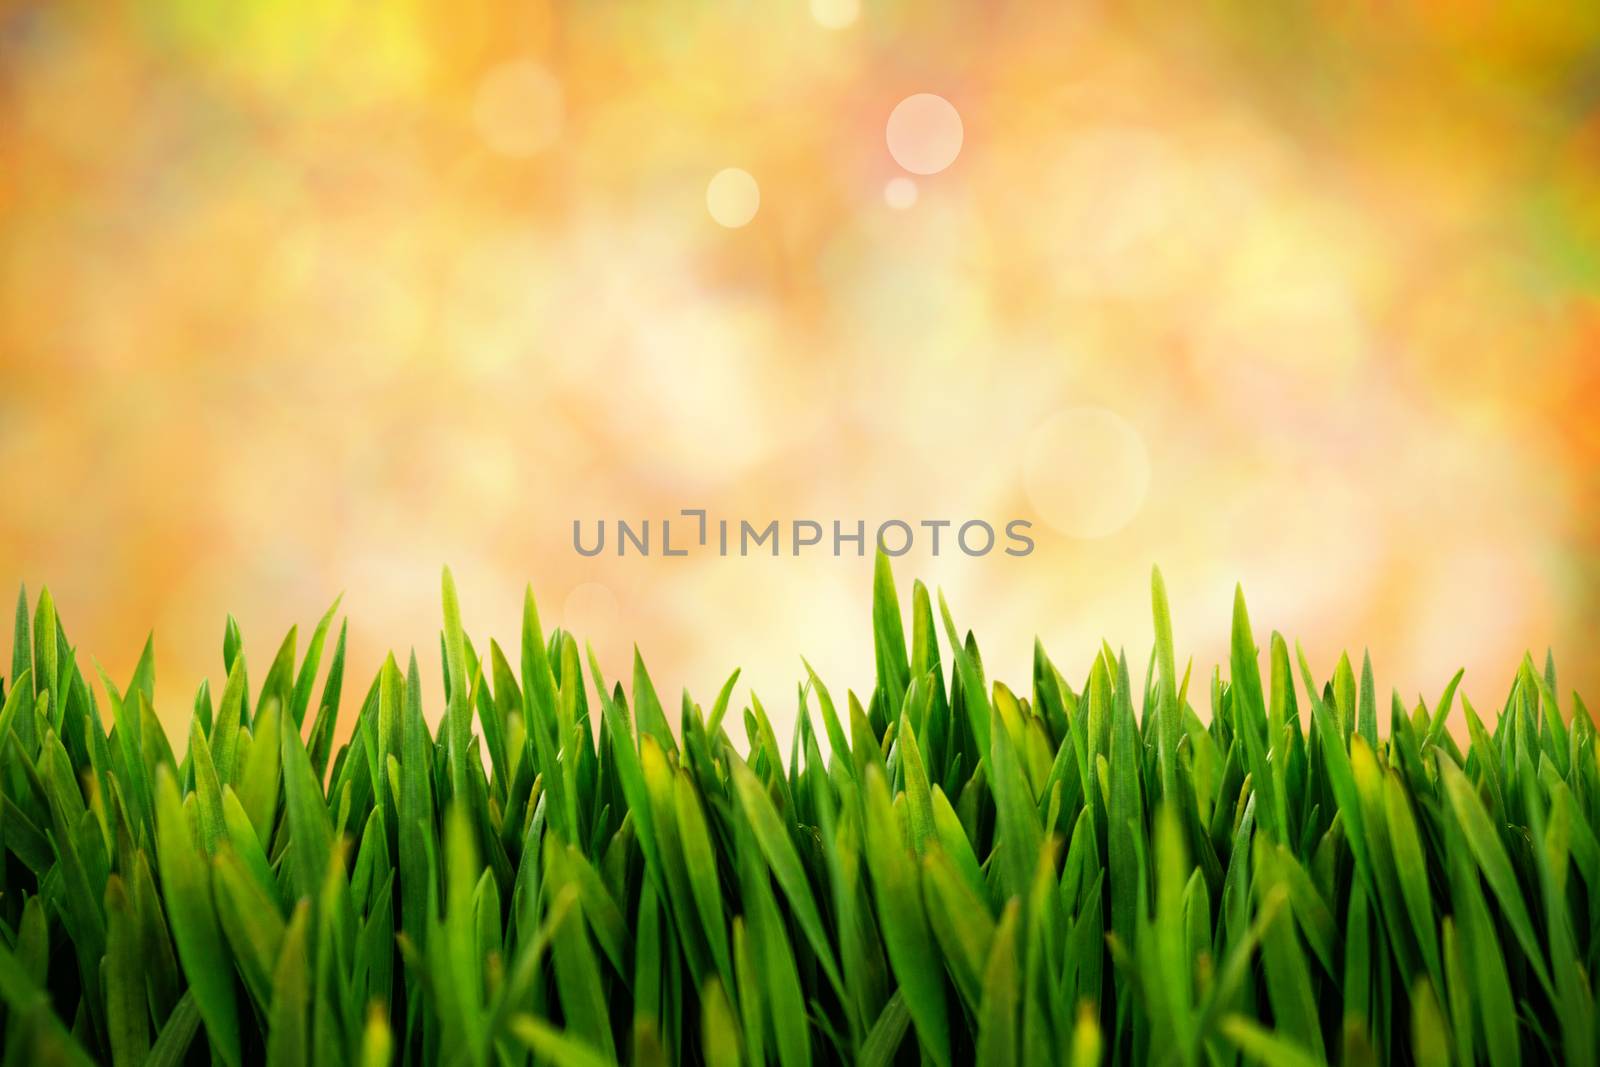 Grass growing outdoors against glowing lights behind field